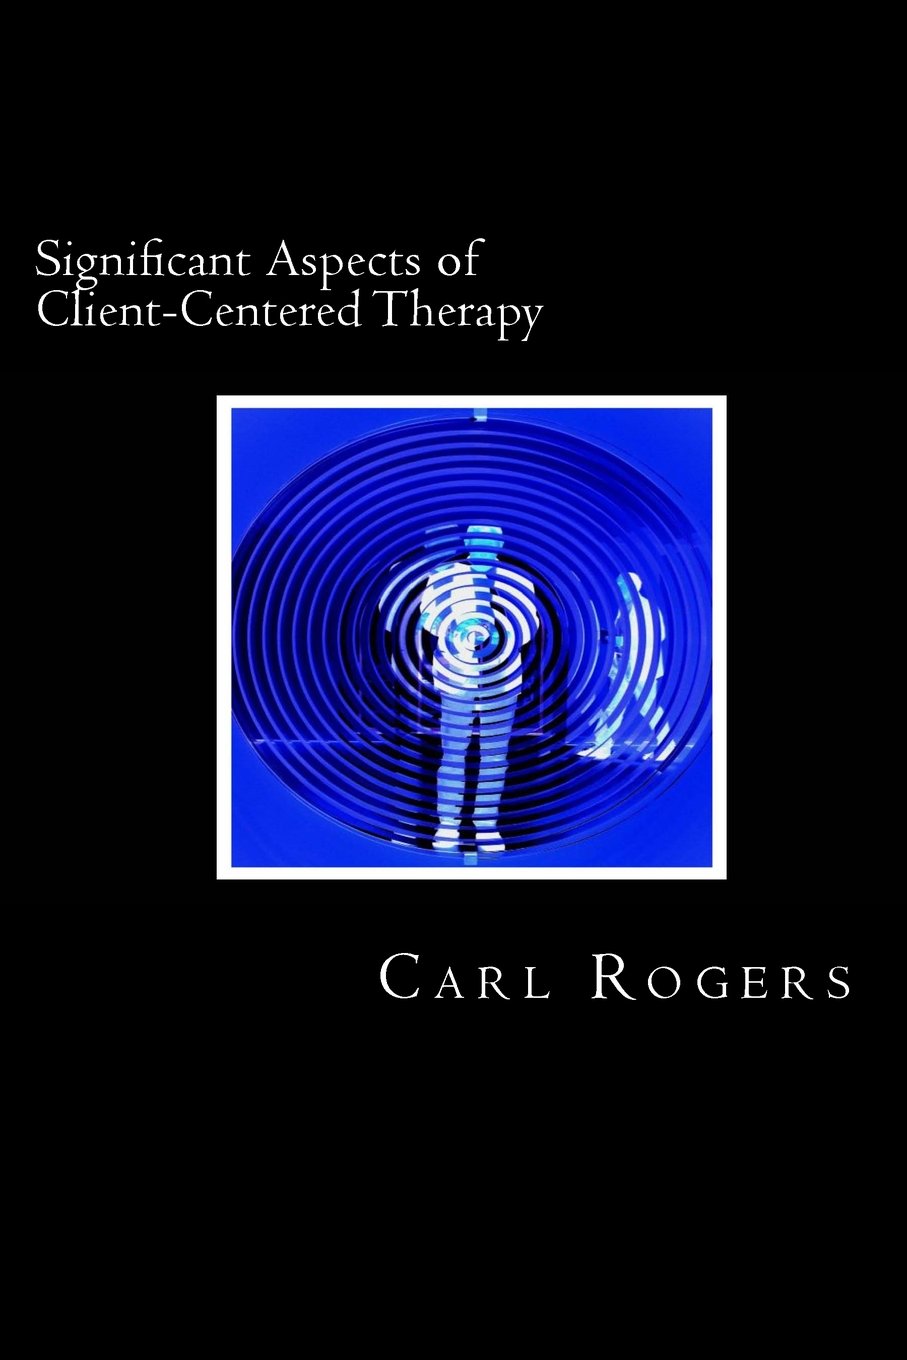 Significant Aspects of Client-Centered Therapy by Carl Rogers Book Cover